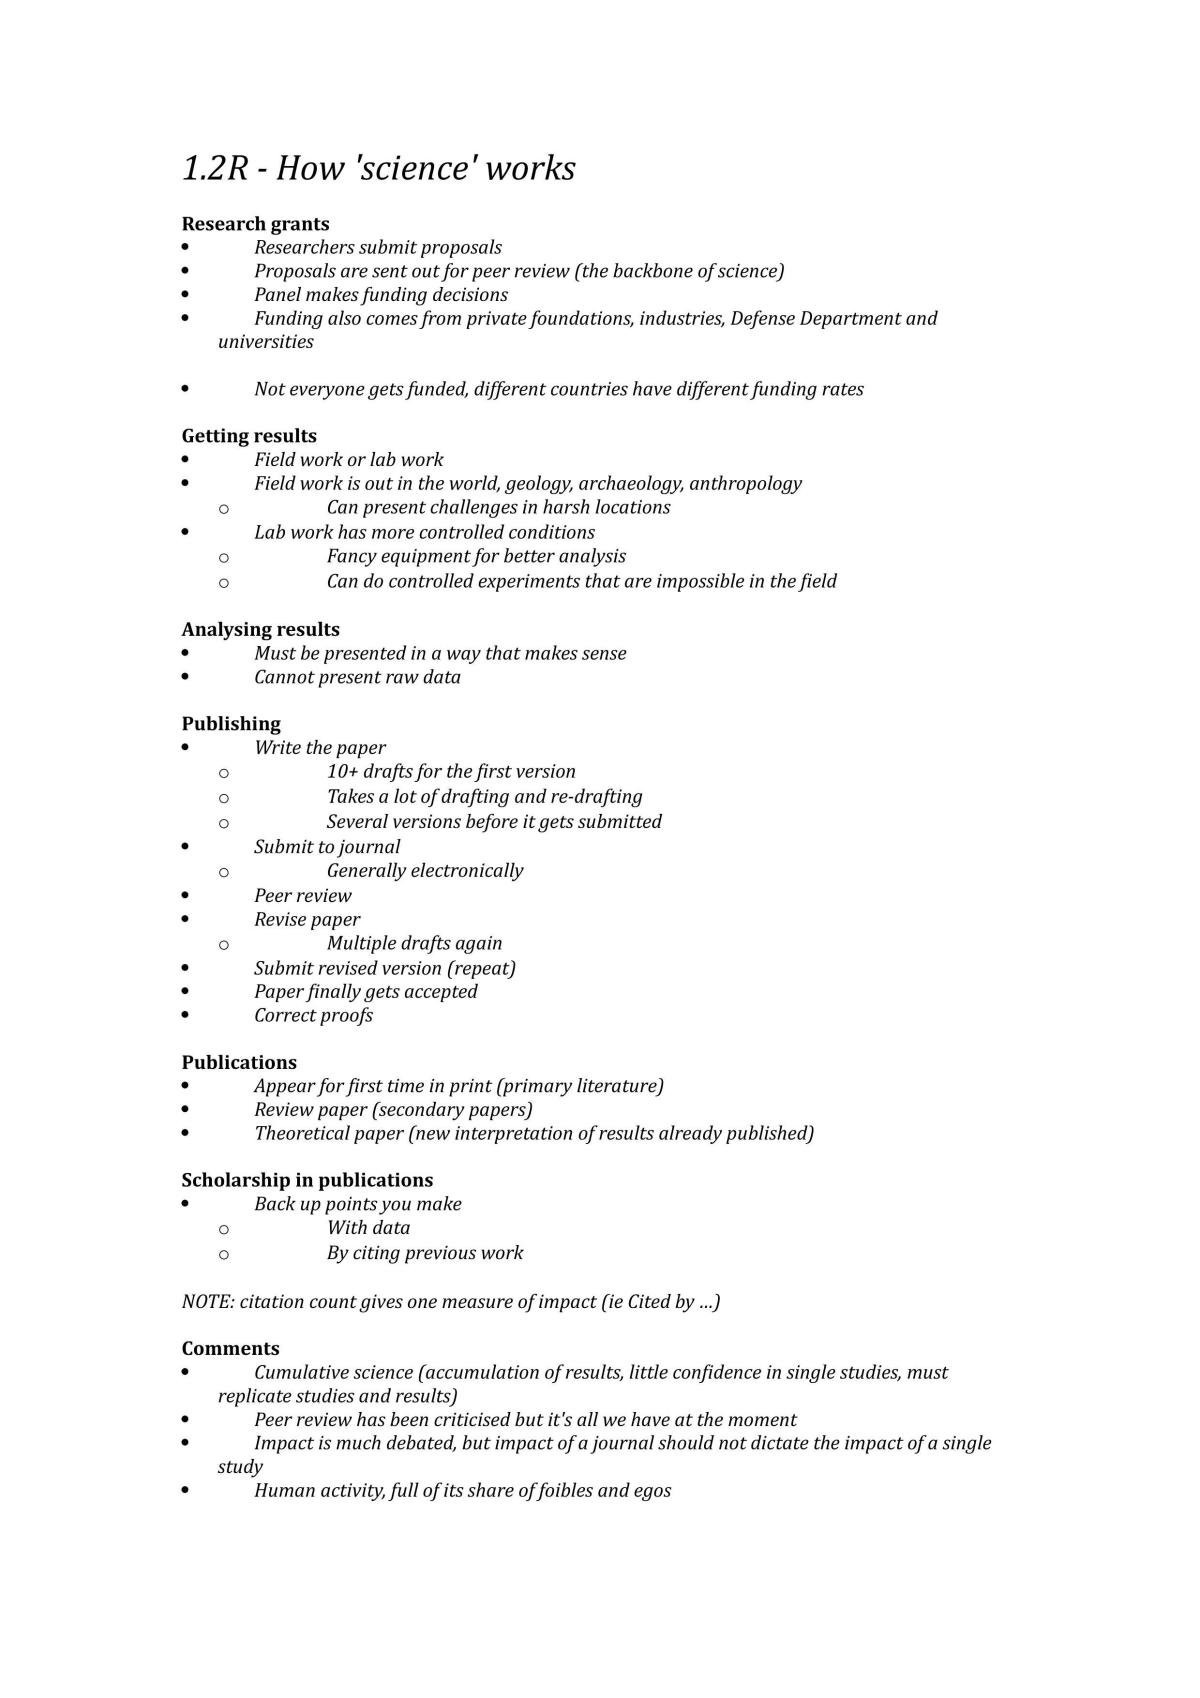 Biological Basis of Behaviour Study Guide - Page 1